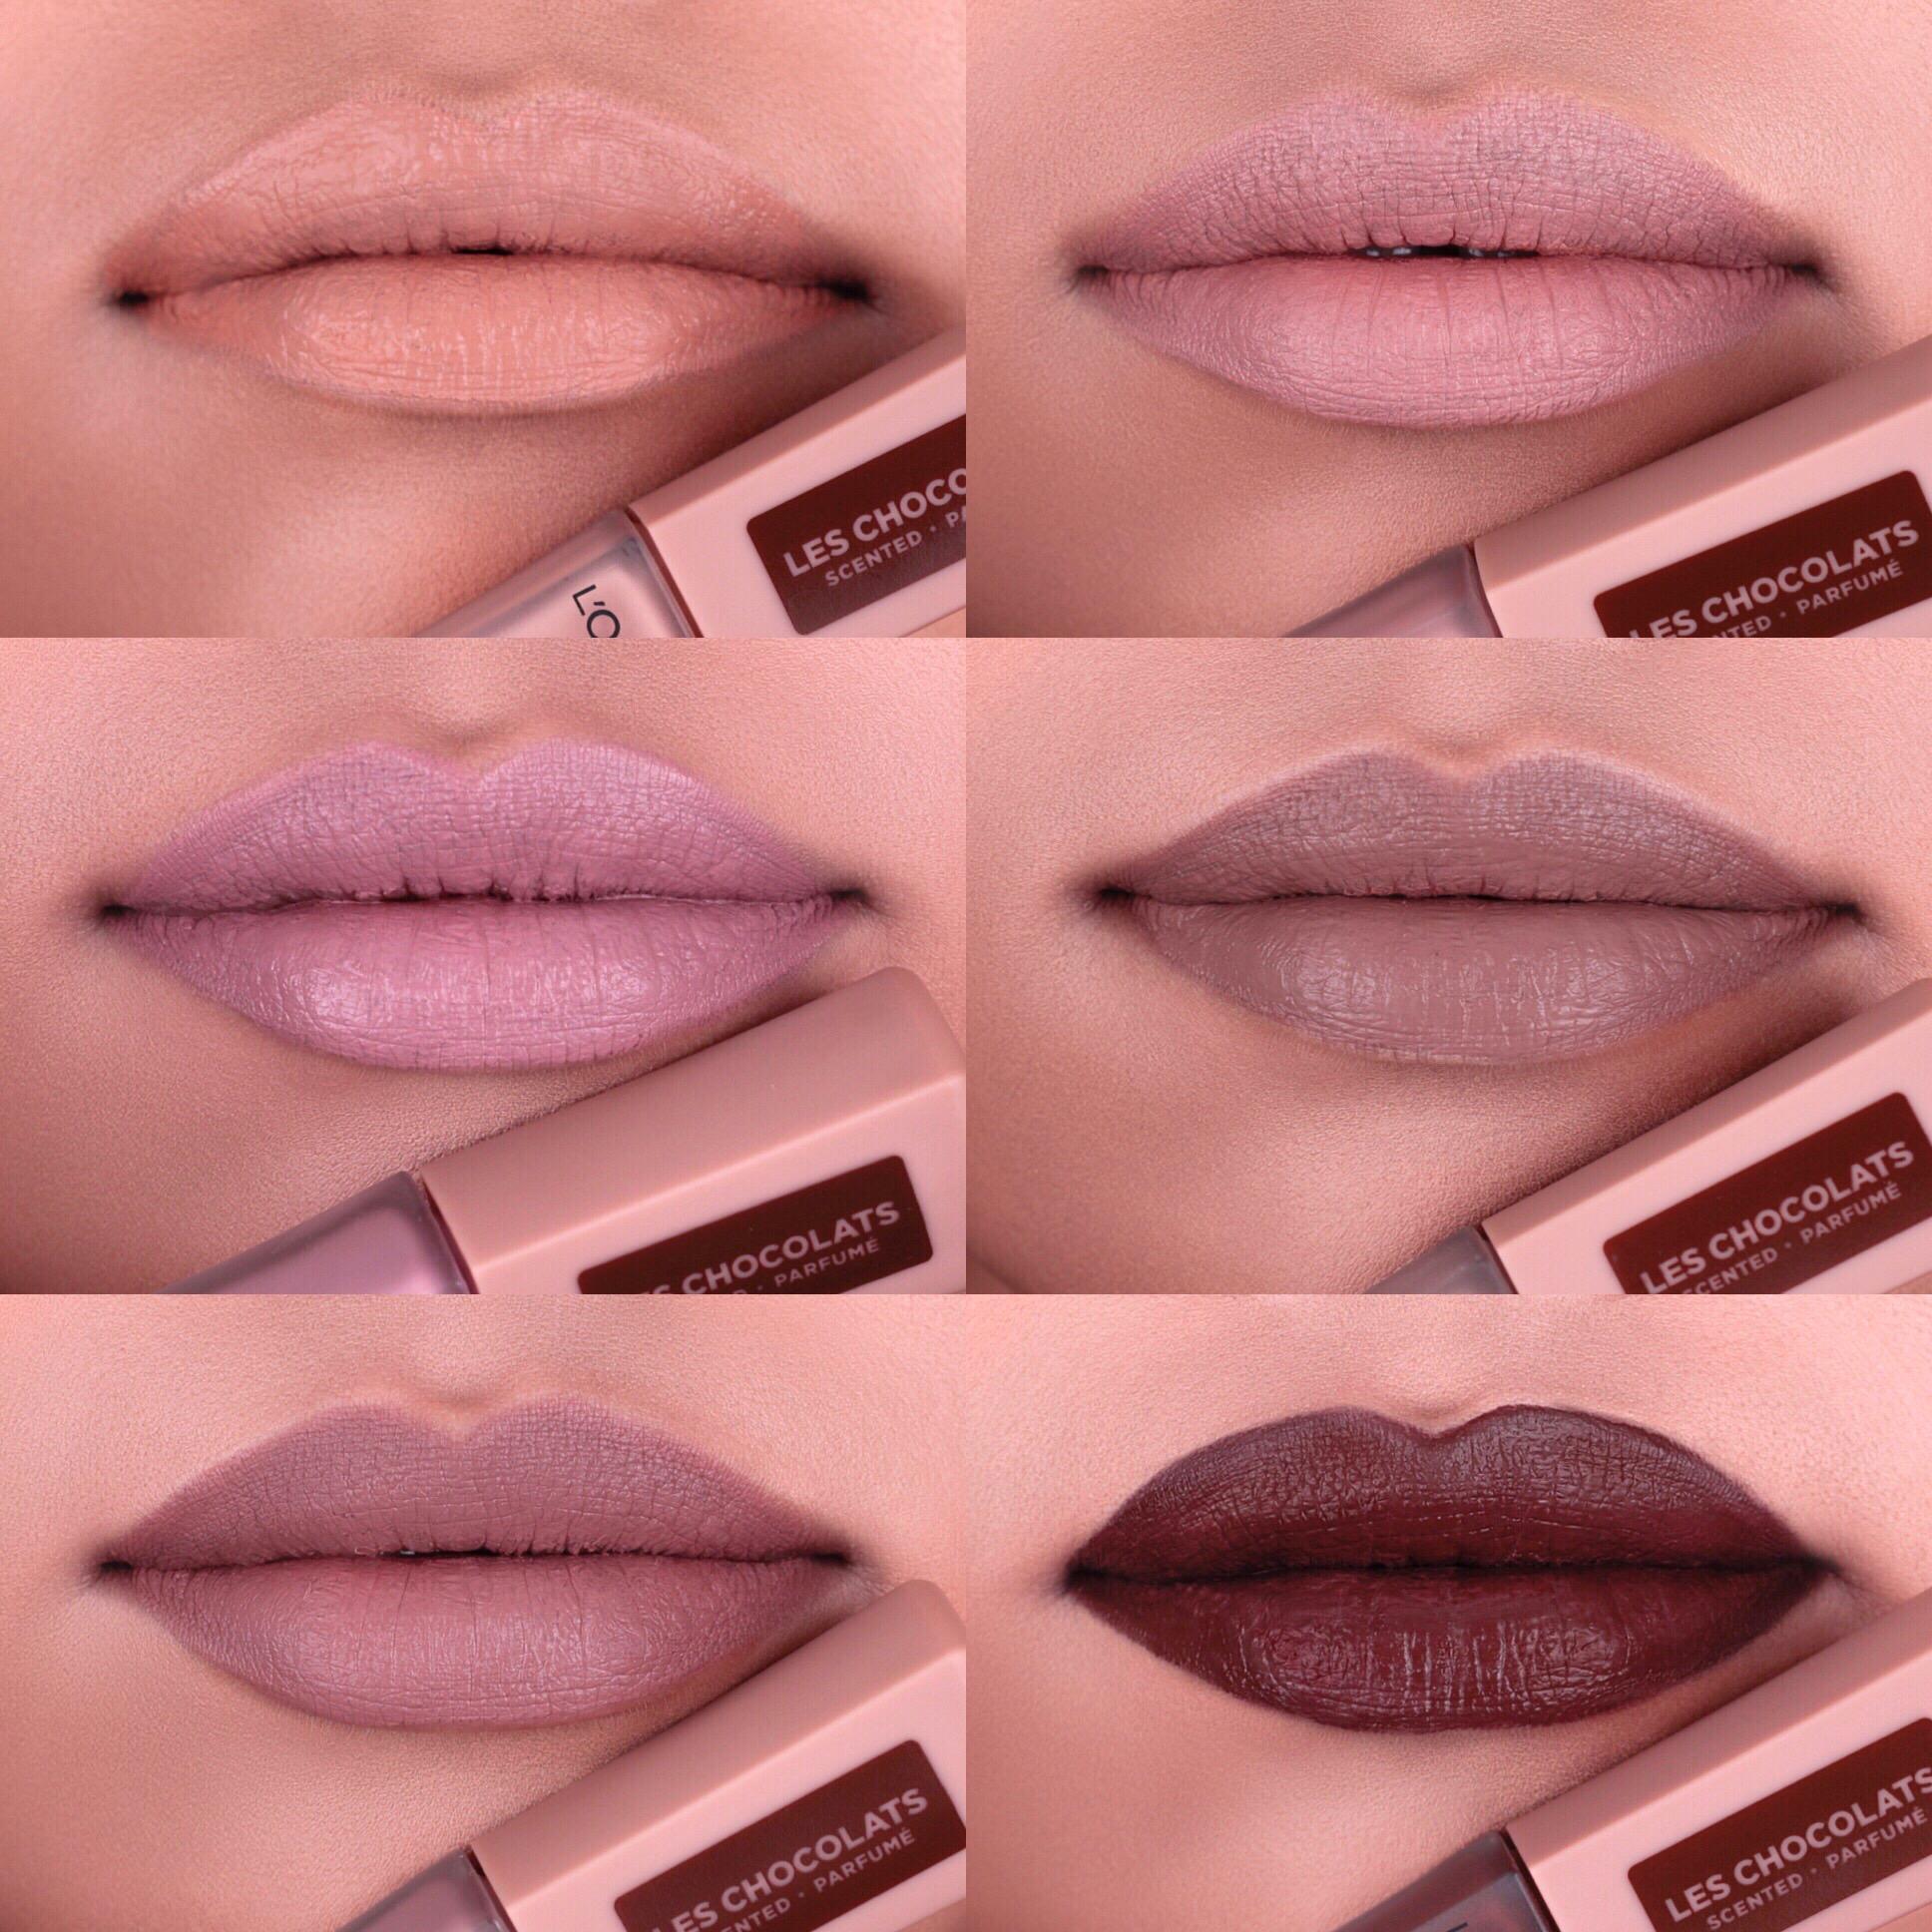 L'Oréal Paris USA on Twitter: "All-day wear with a chocolate aroma... Infallible  Pro Matte Liquid Lipstick just got even more addictive! Introducing Les  Chocolats Scented nude liquid lipsticks 💕🍫Available now at  https://t.co/ilaLVbMzKV,